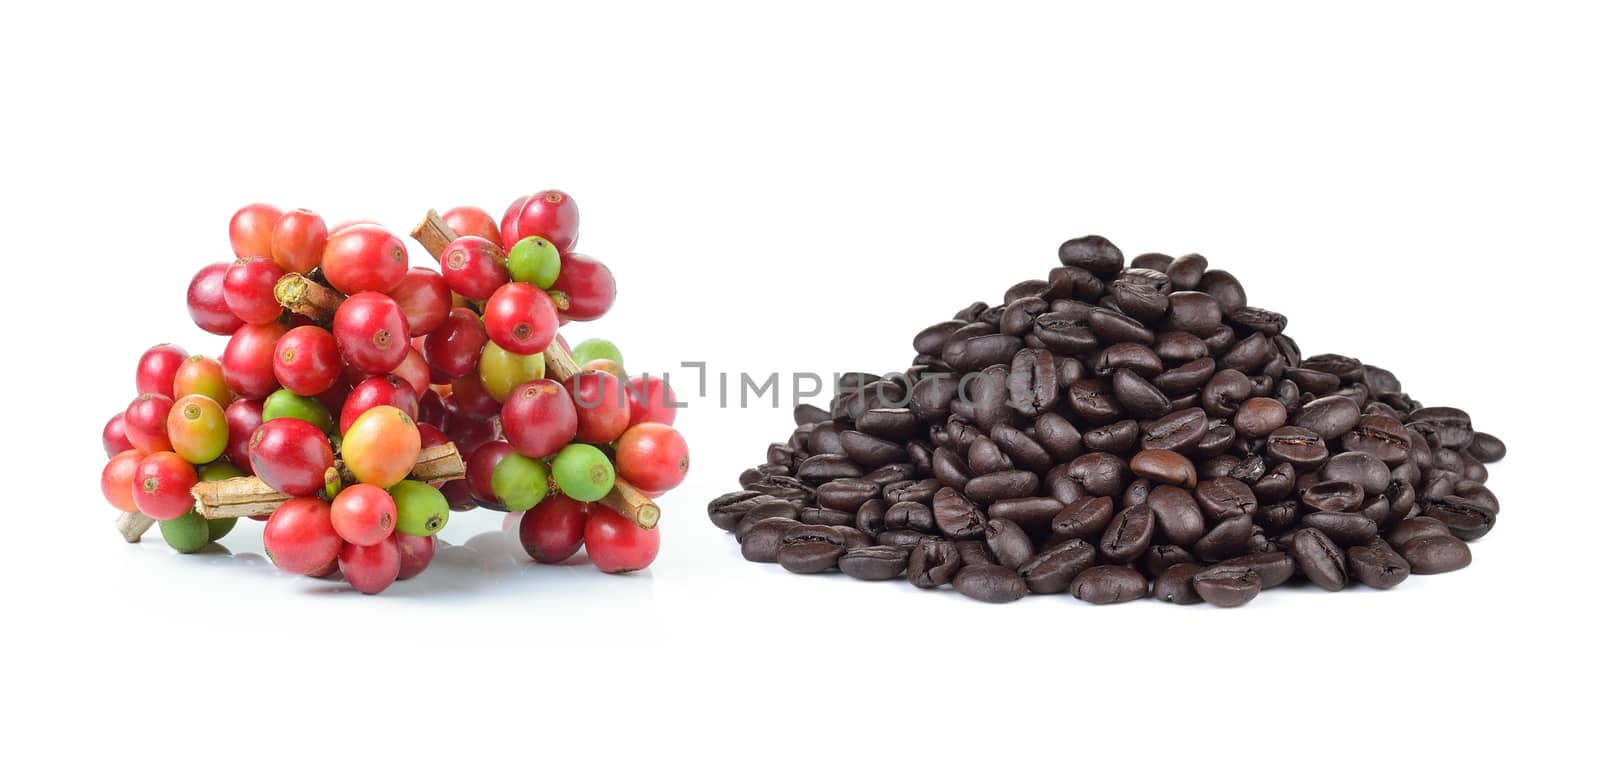 coffee beans on white background by sommai